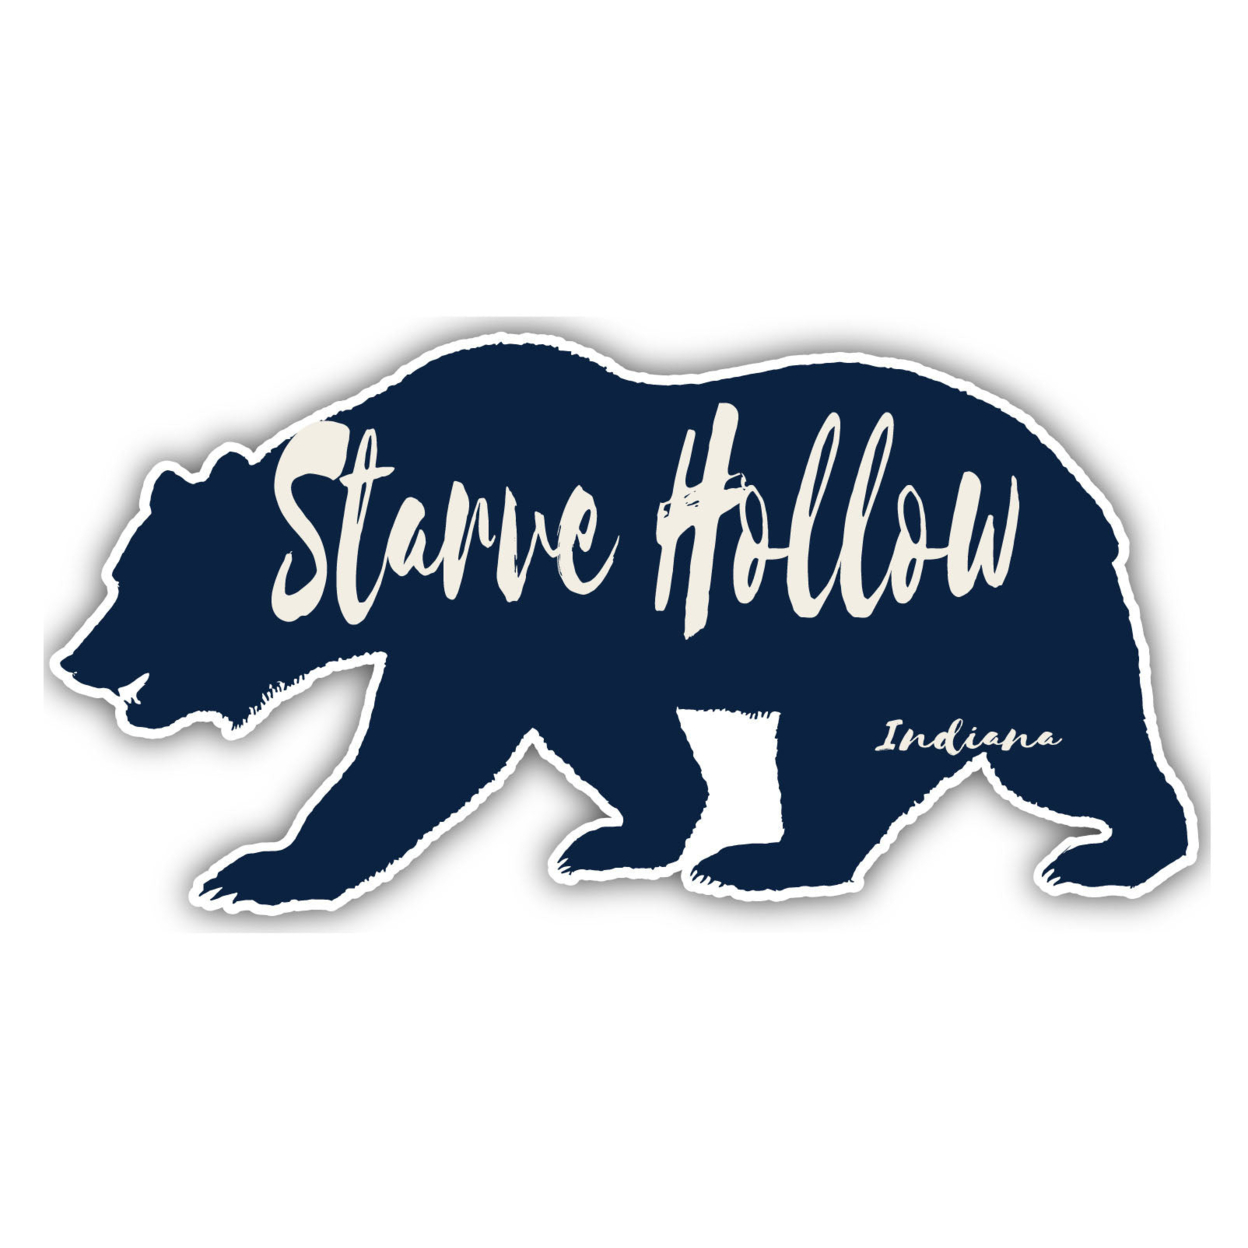 Starve Hollow Indiana Souvenir Decorative Stickers (Choose Theme And Size) - Single Unit, 2-Inch, Bear